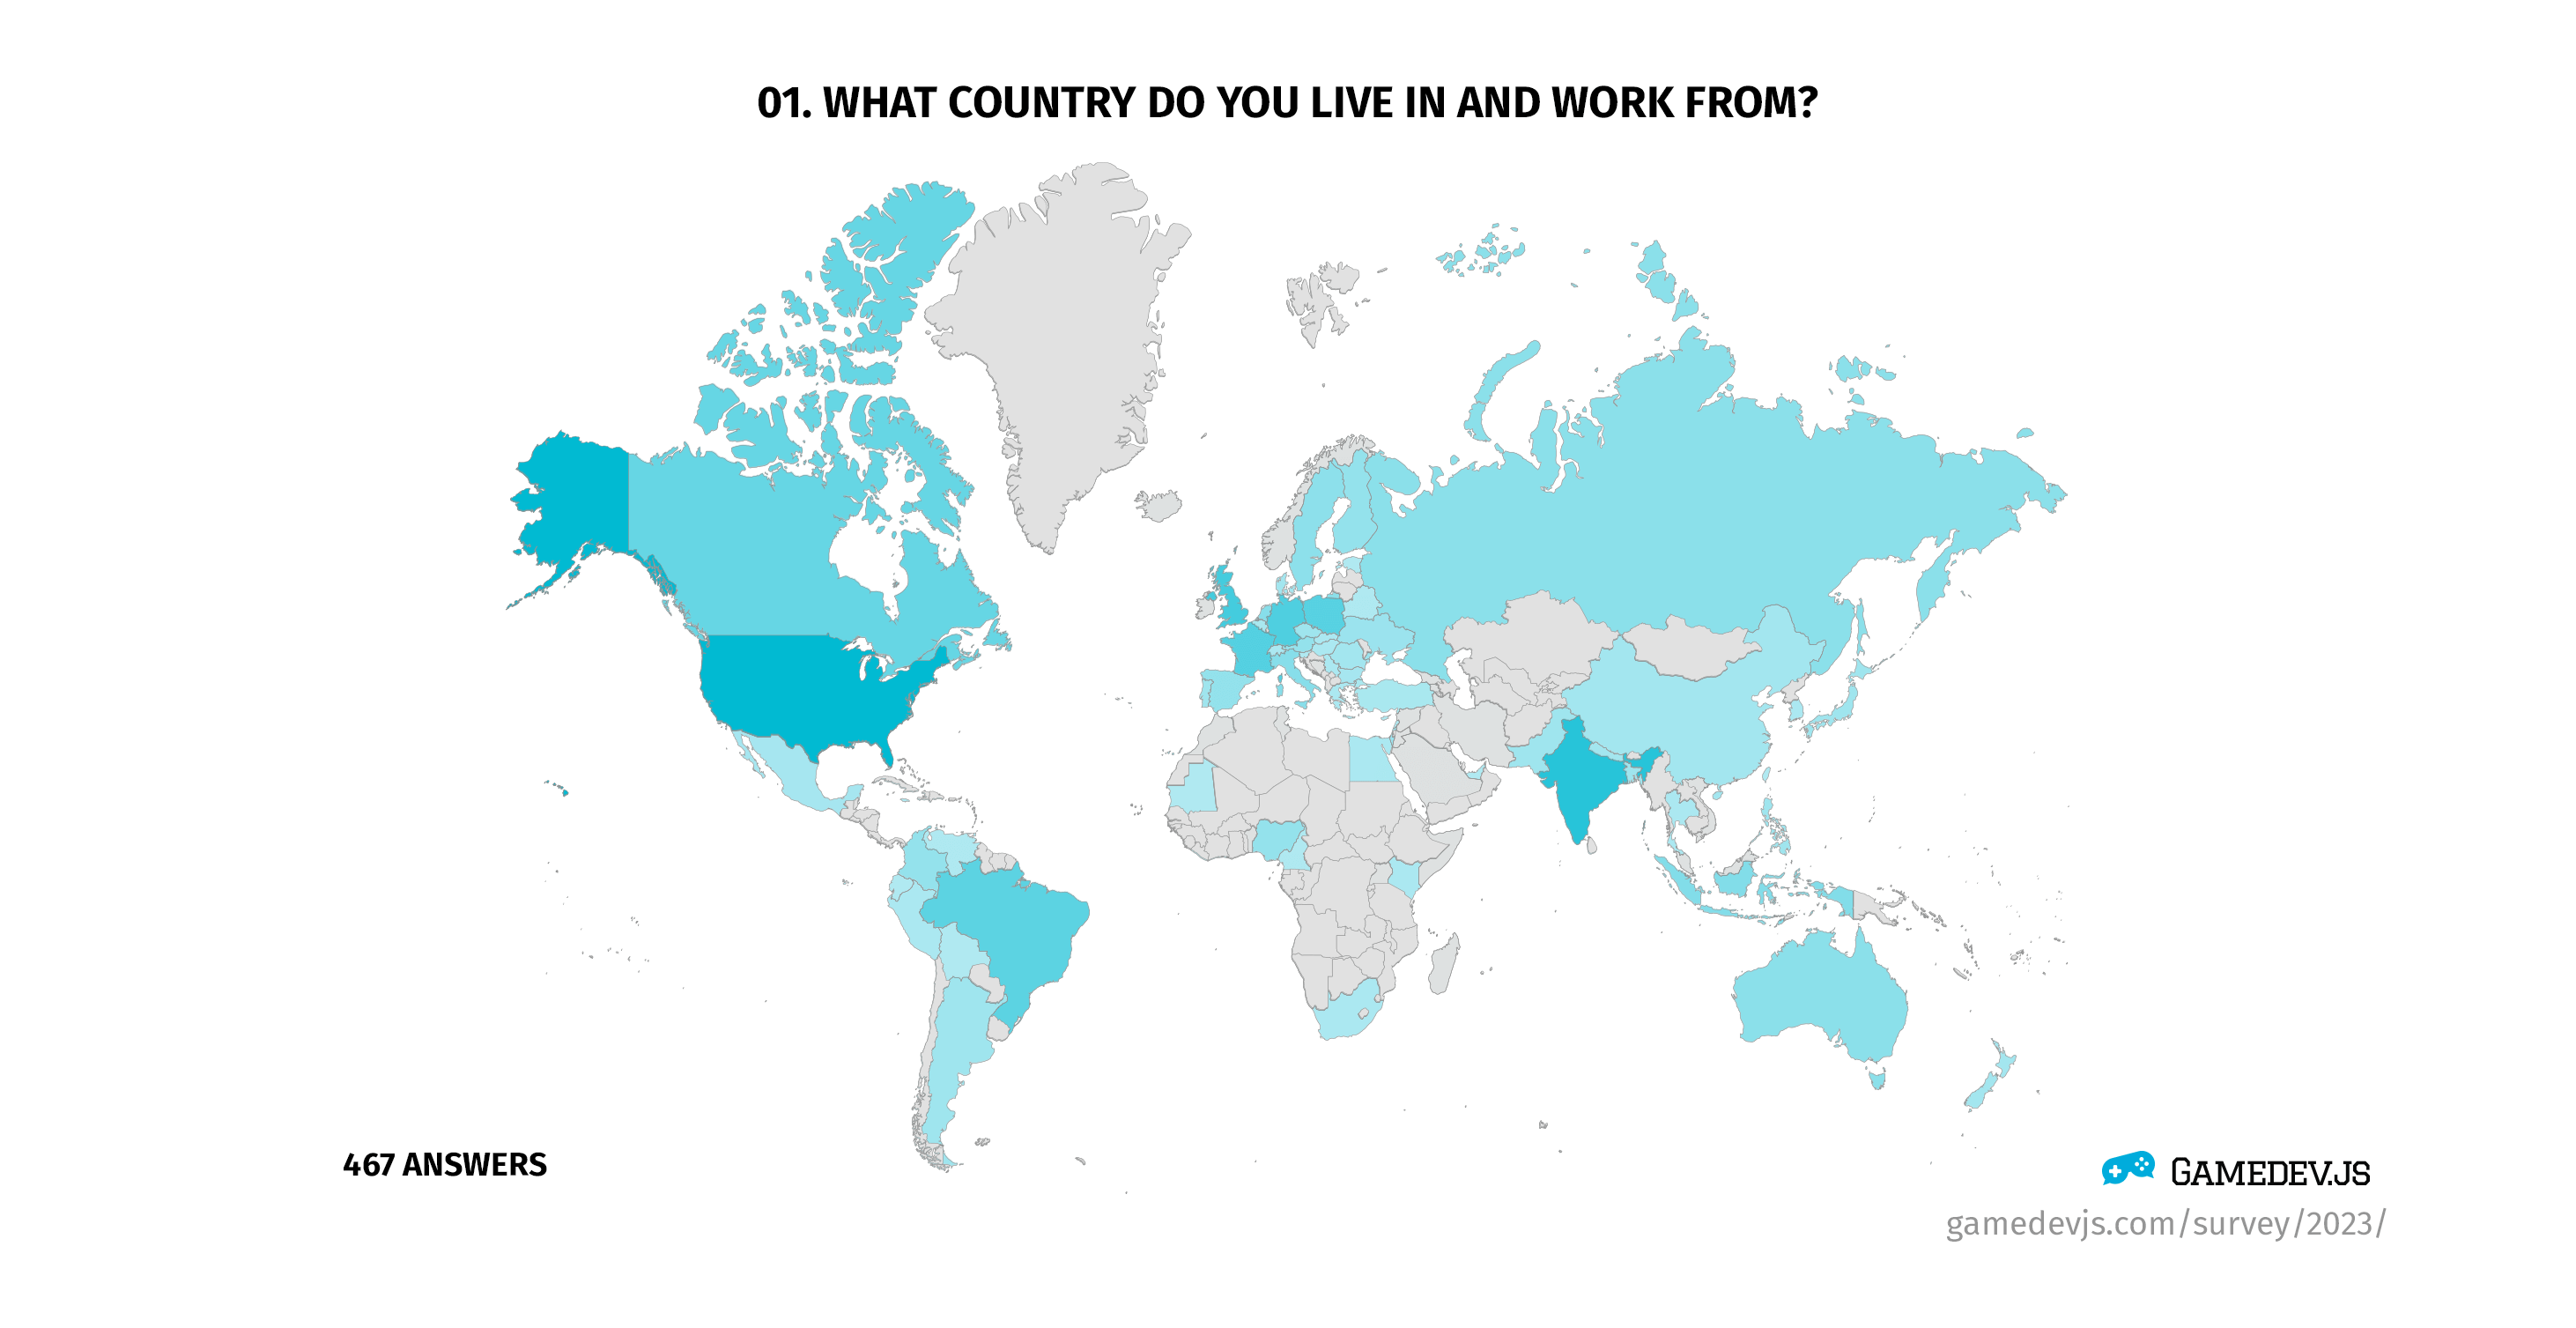 Gamedev.js Survey 2023 - Question #1: What country do you live in and work from?